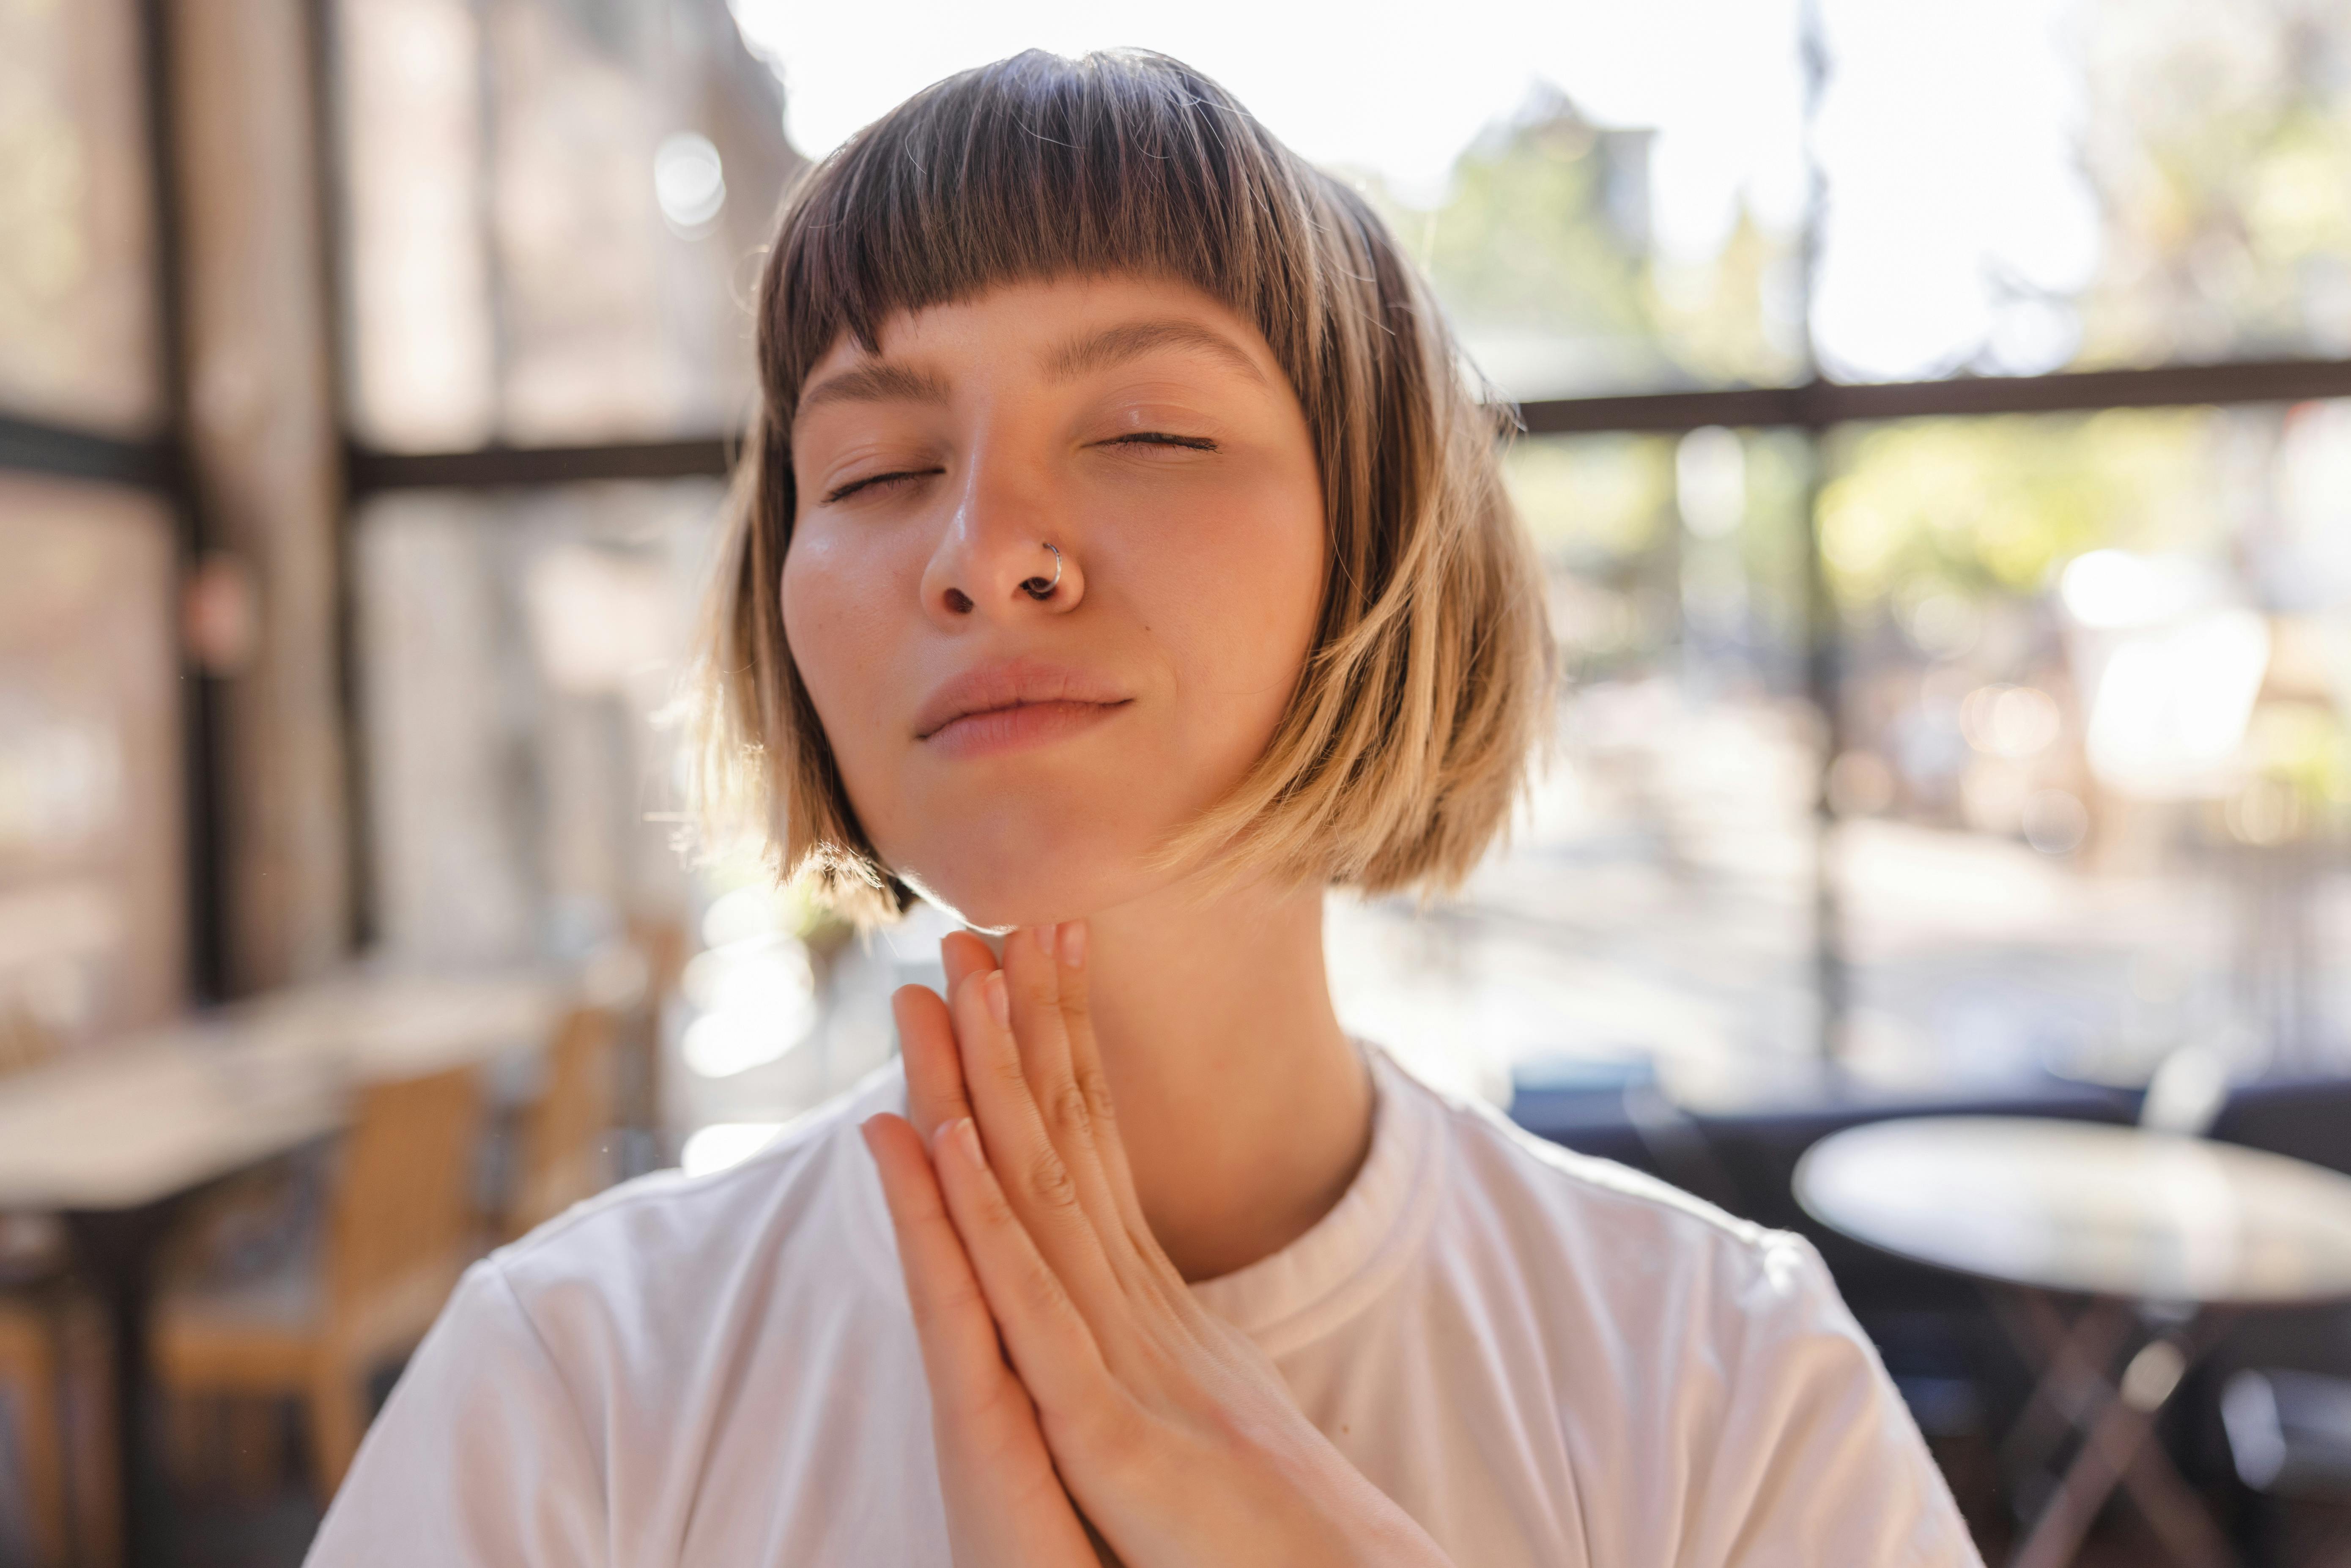 Woman looking calm and free of stress